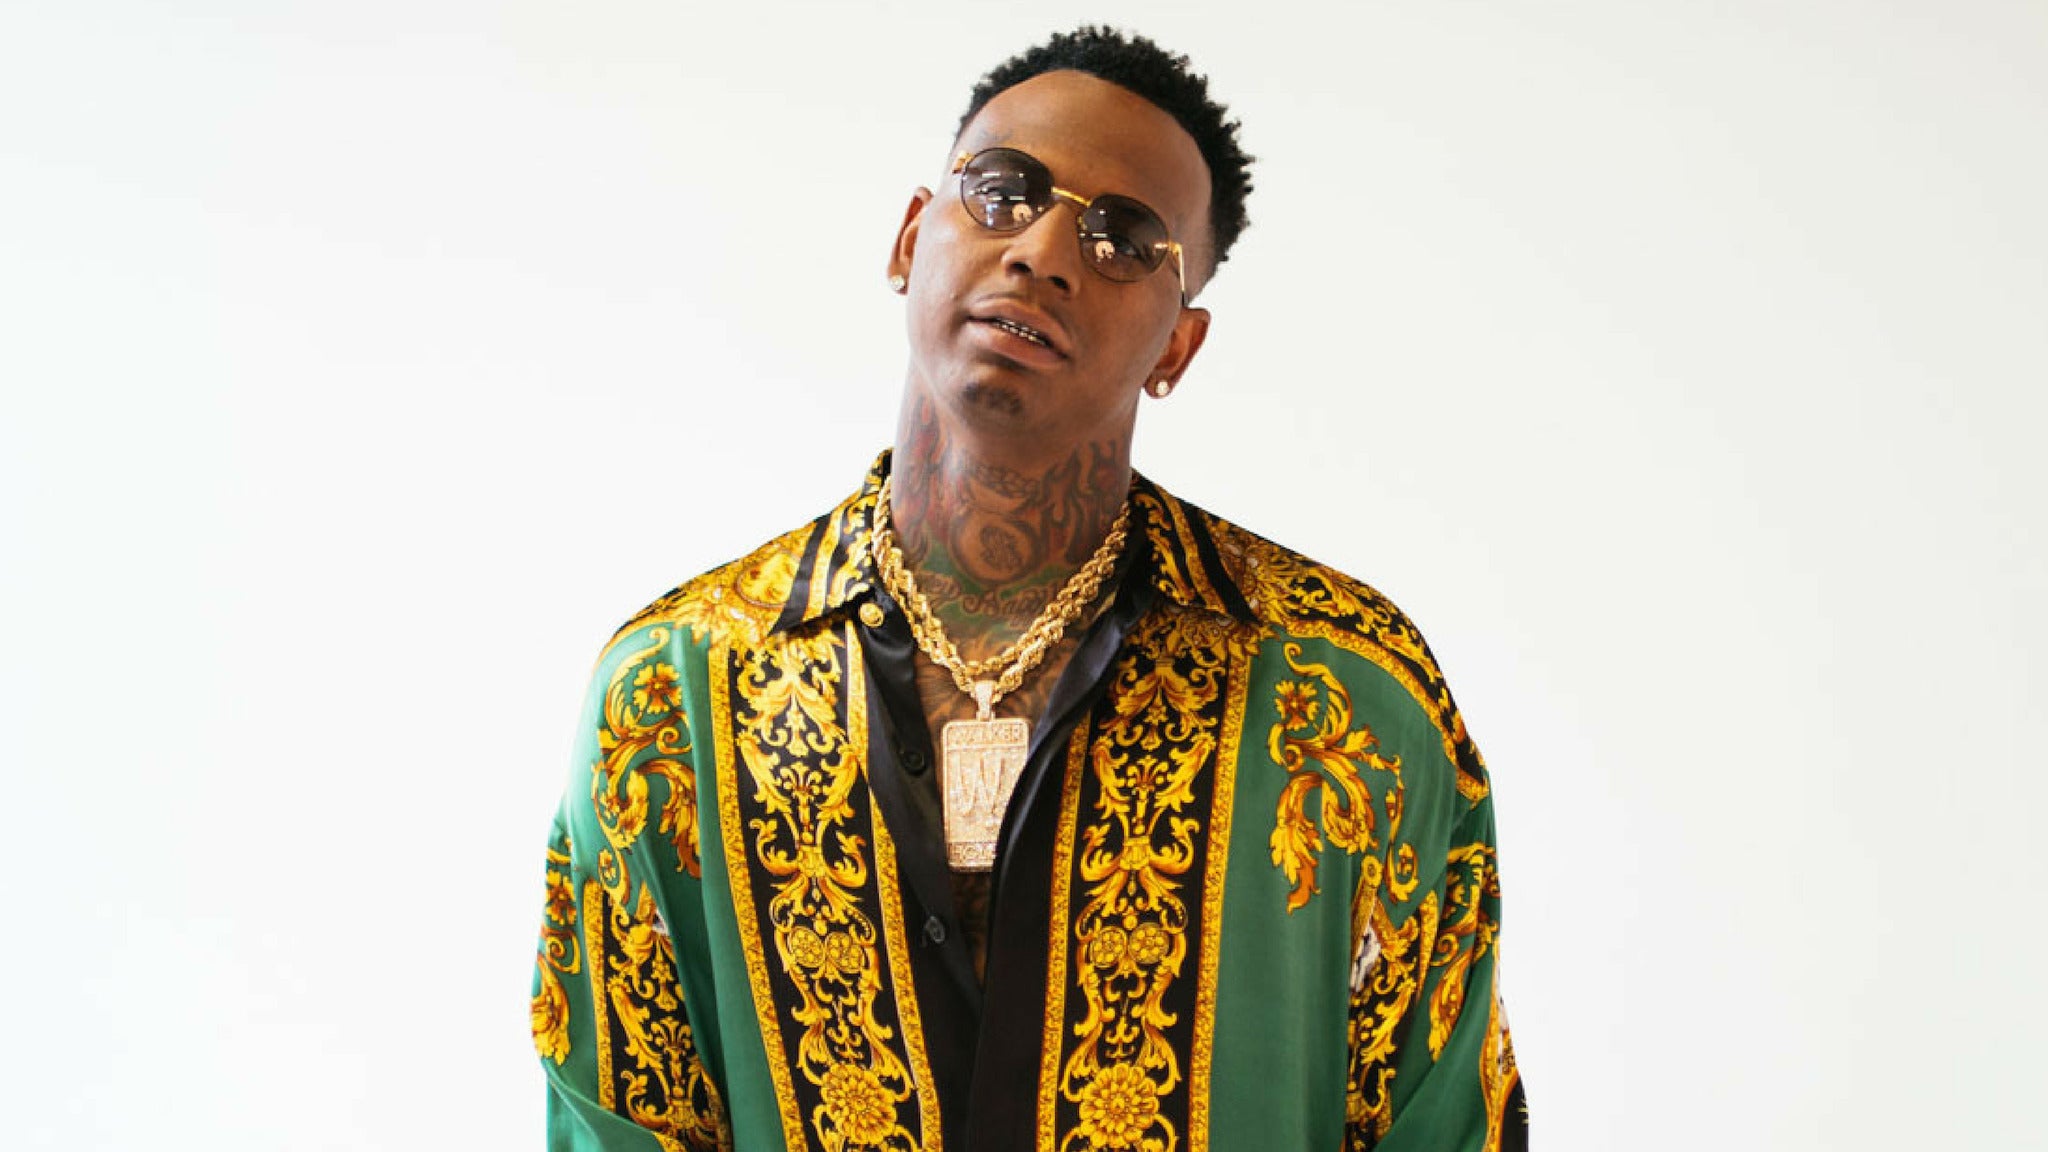 Moneybagg Yo - Word 4 Word Tour in Los Angeles promo photo for Live Nation Mobile App presale offer code